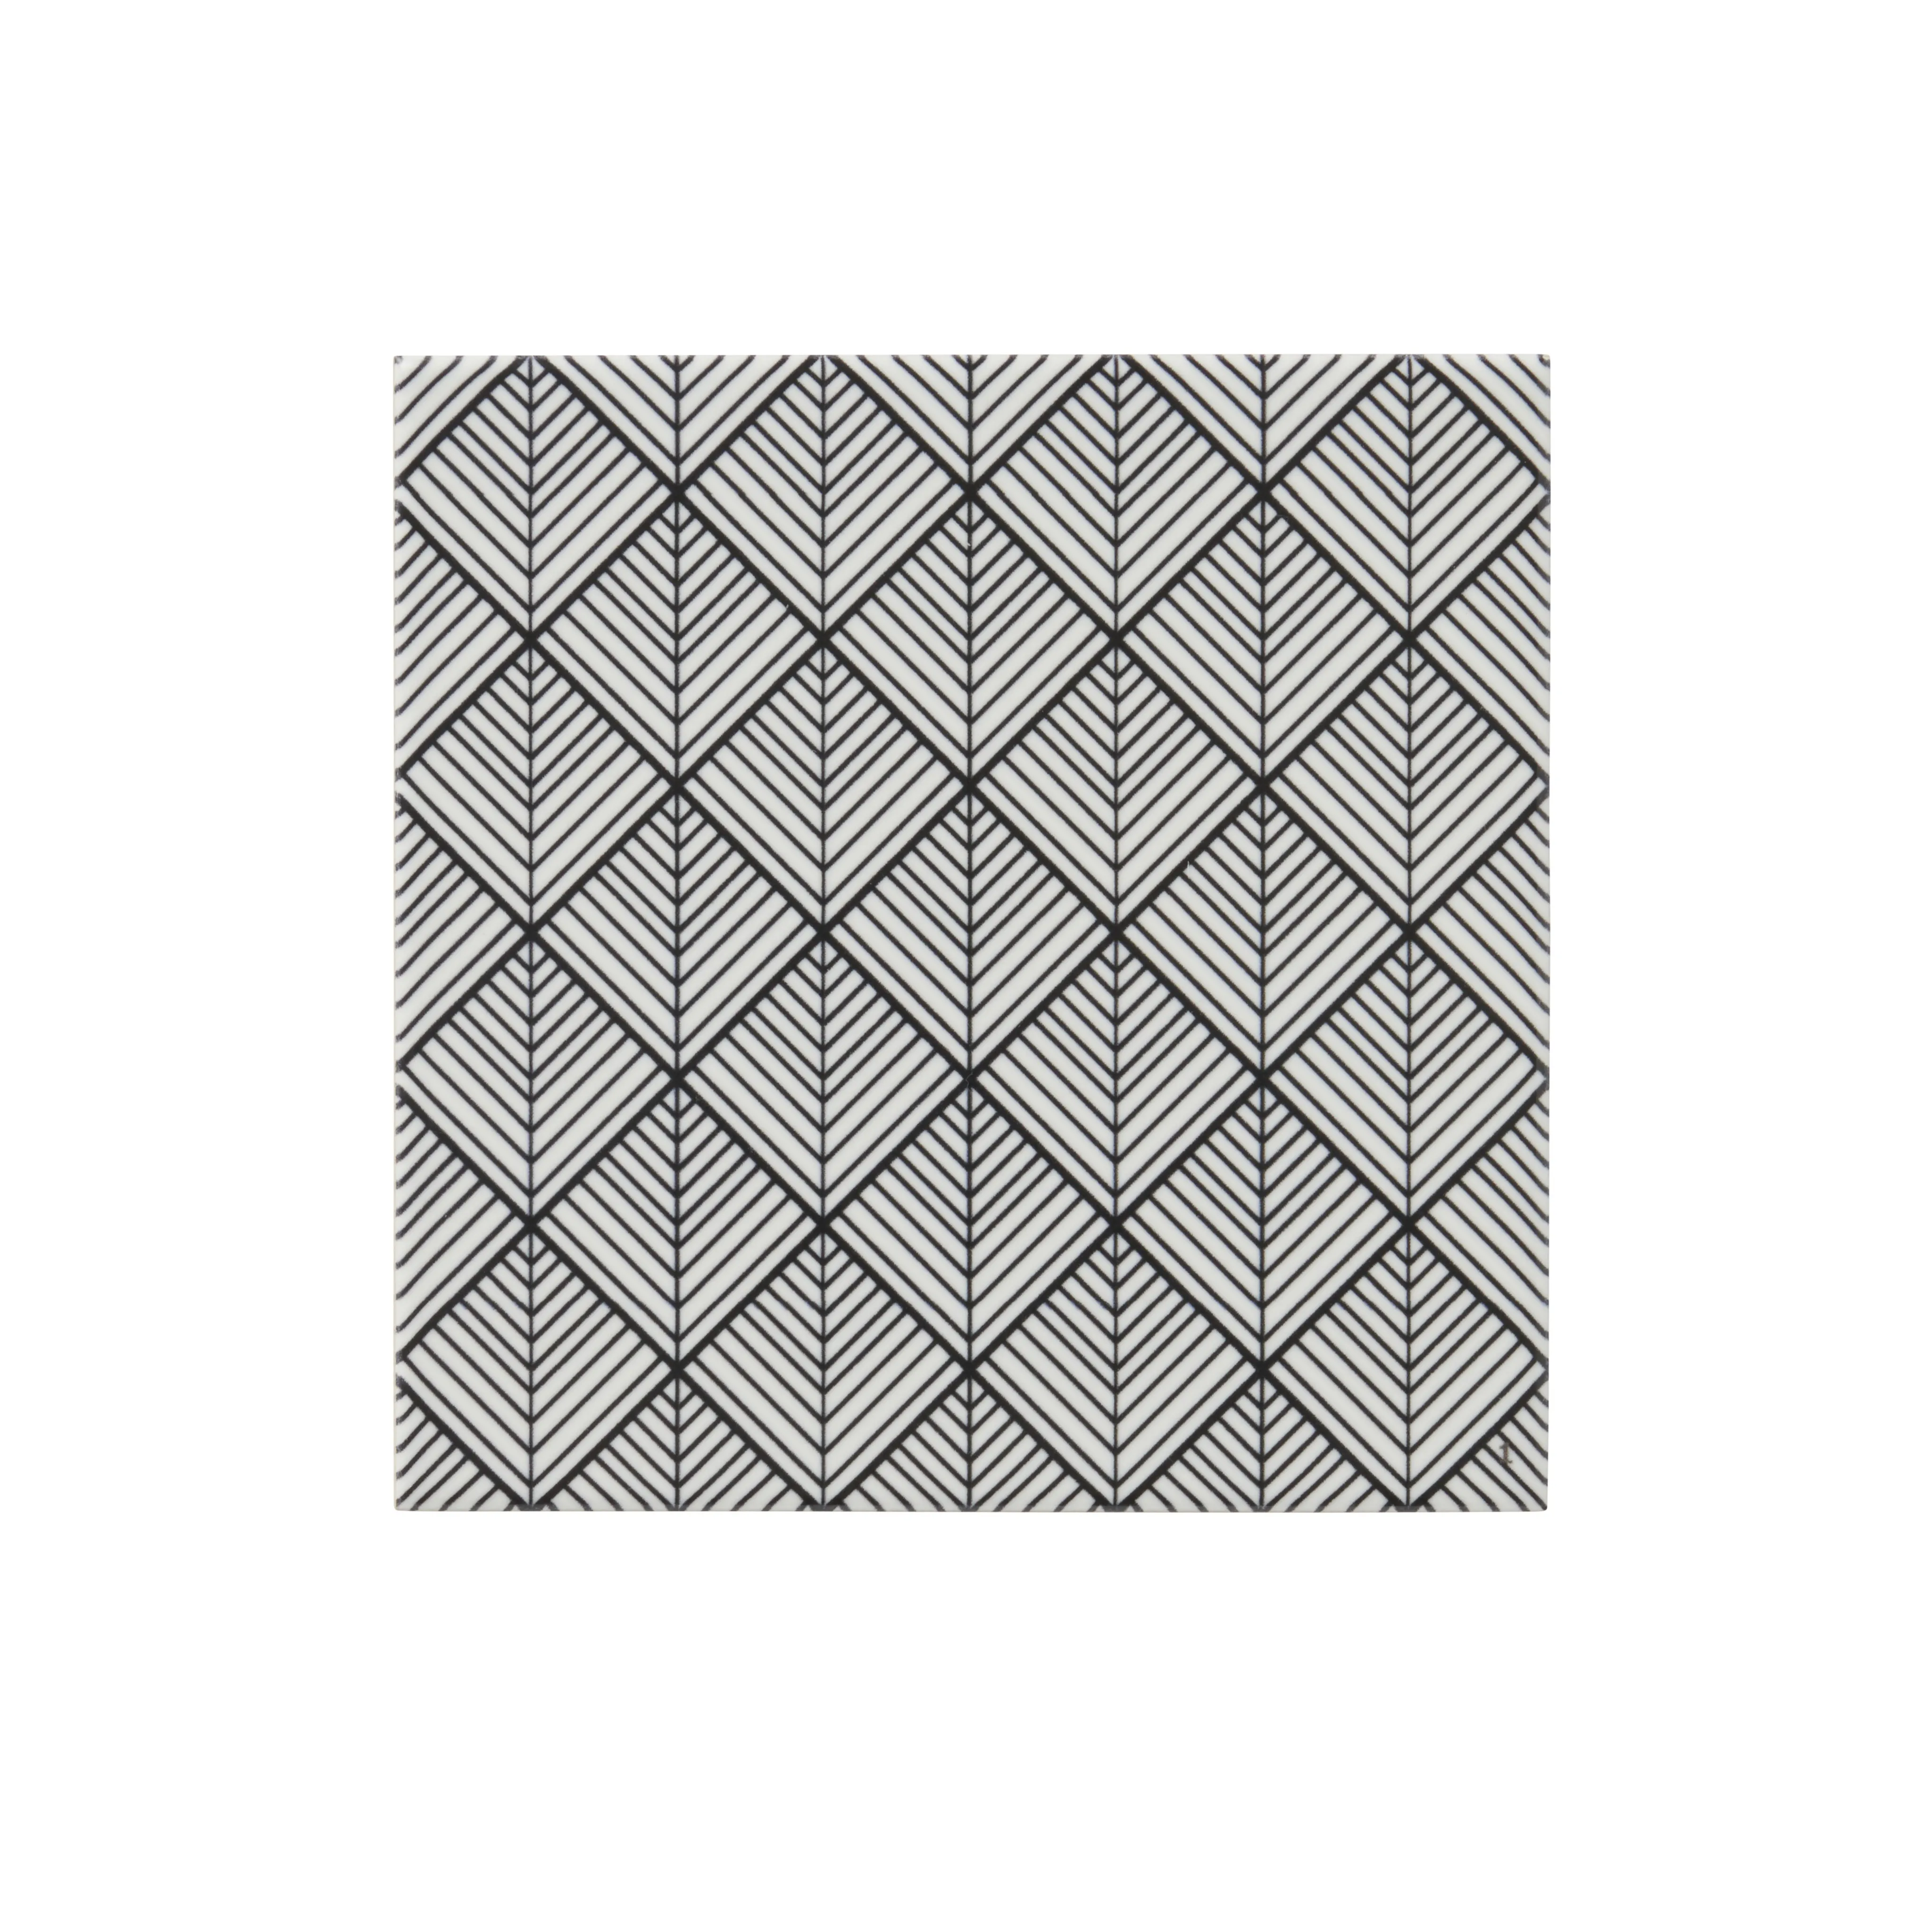 Glina White Gloss Patterned Ceramic Wall Tile, Pack of 40, (L)150mm (W)150mm